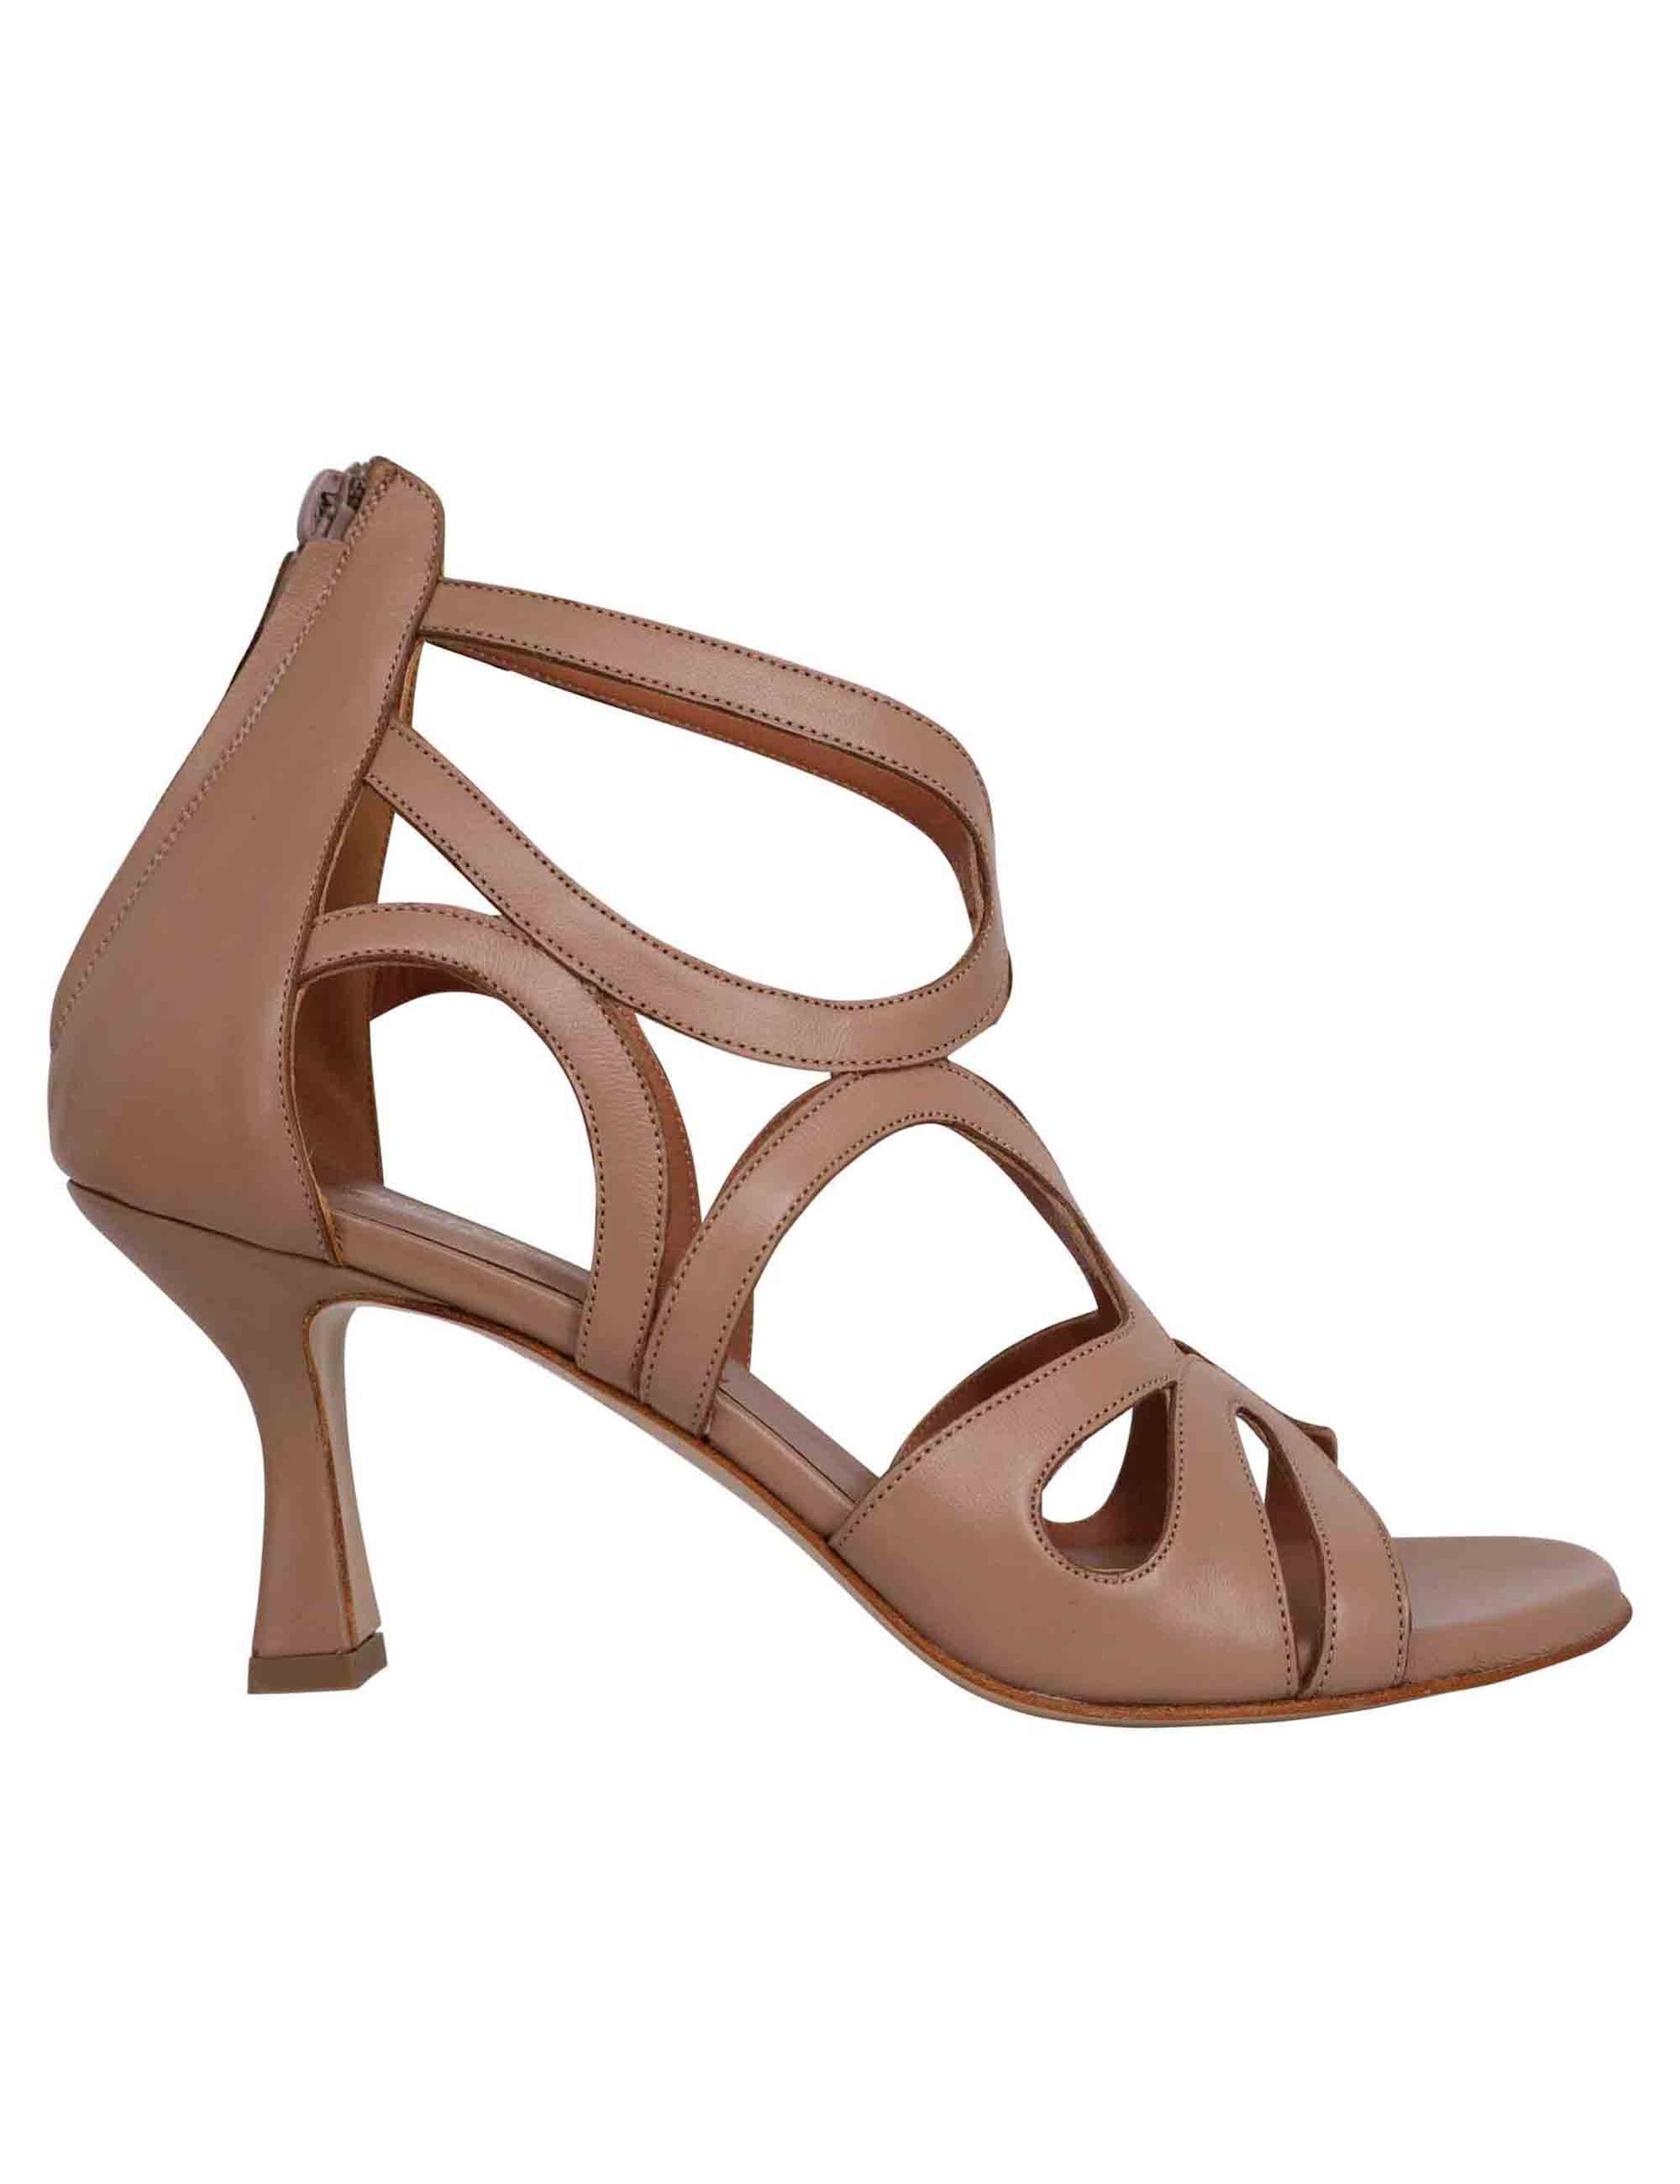 Women's sandals in natural leather with closed heel and round toe